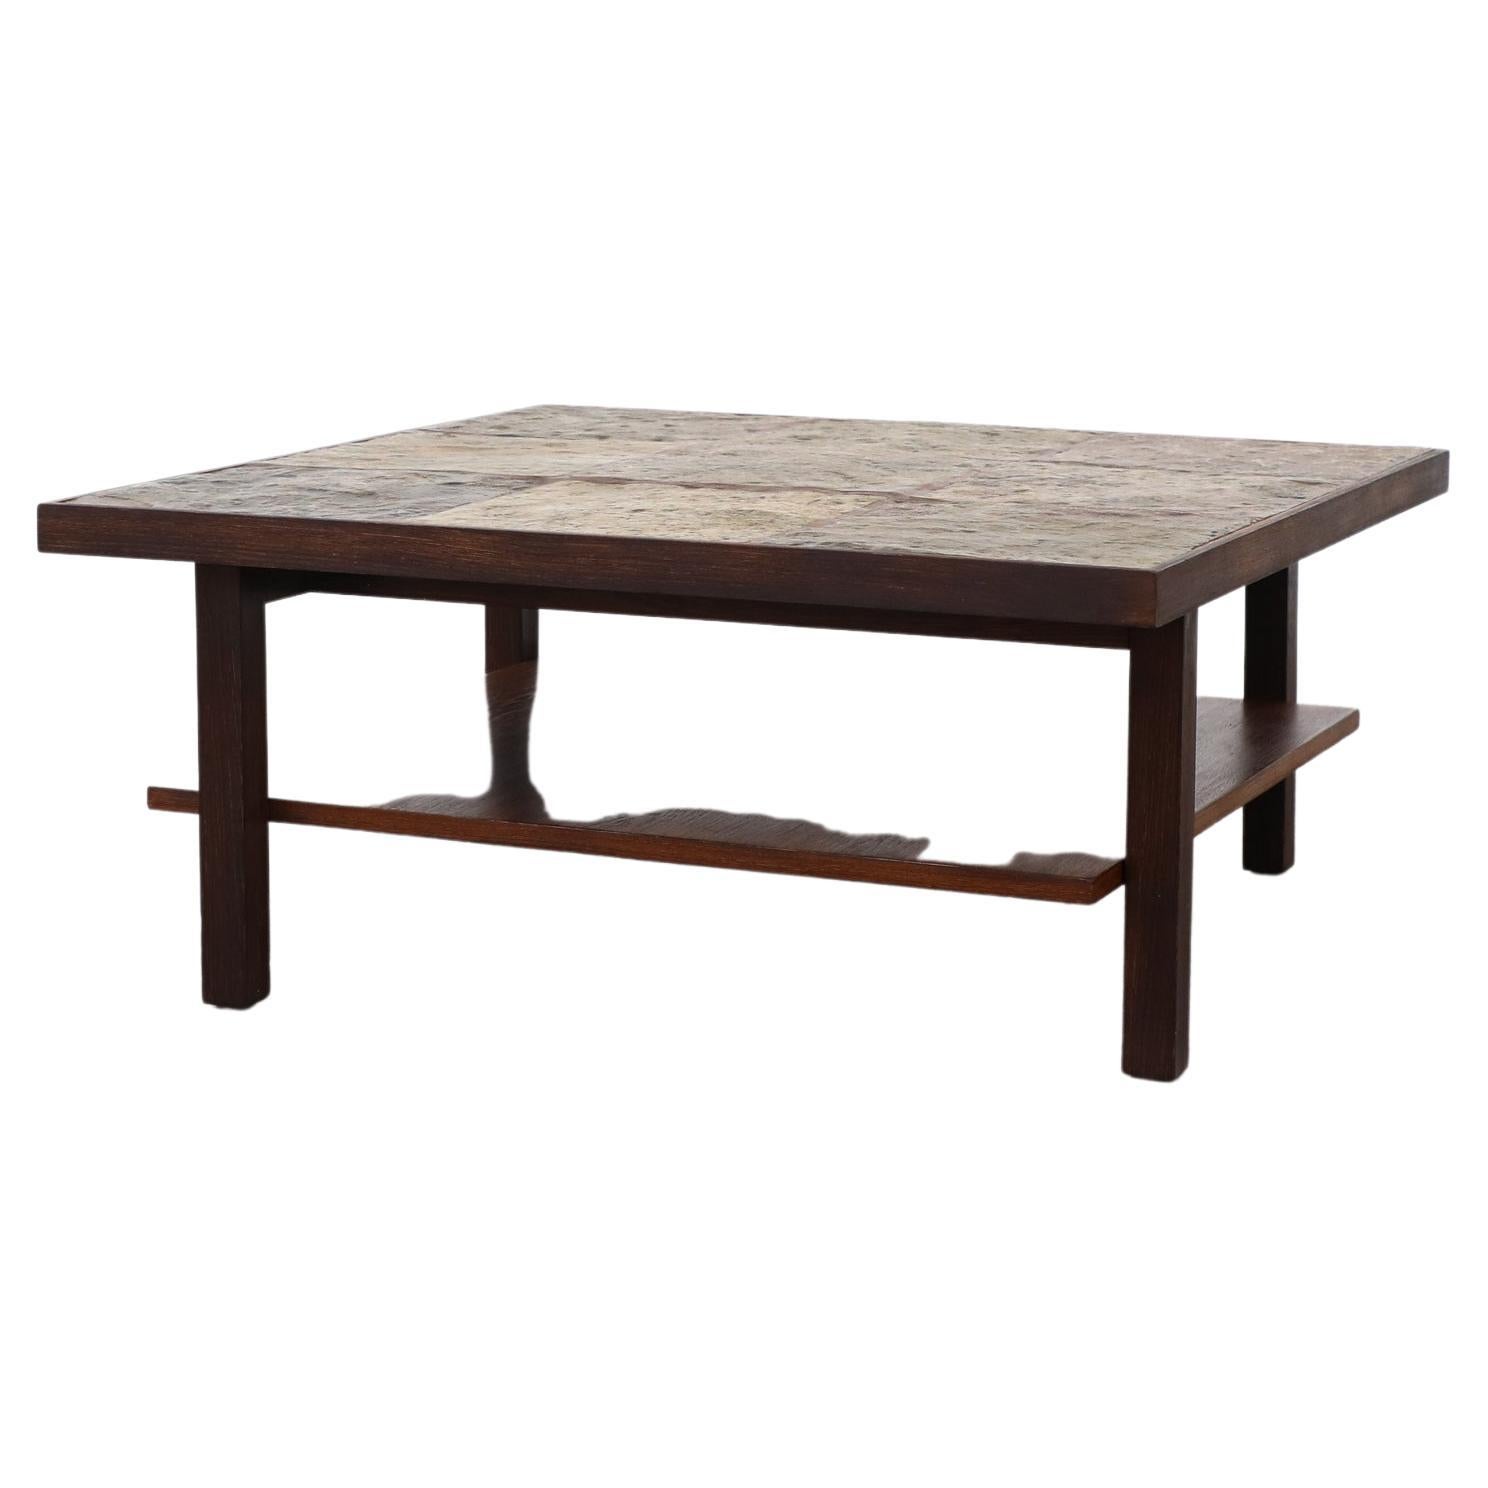 Mid-century Brutalist stone topped coffee or side table with wenge frame, lower shelf and asymmetrical legs. Earth toned slate tiles inset into a wenge frame with floating lower shelf. Lightly refinished with visible wear consistent with its age and